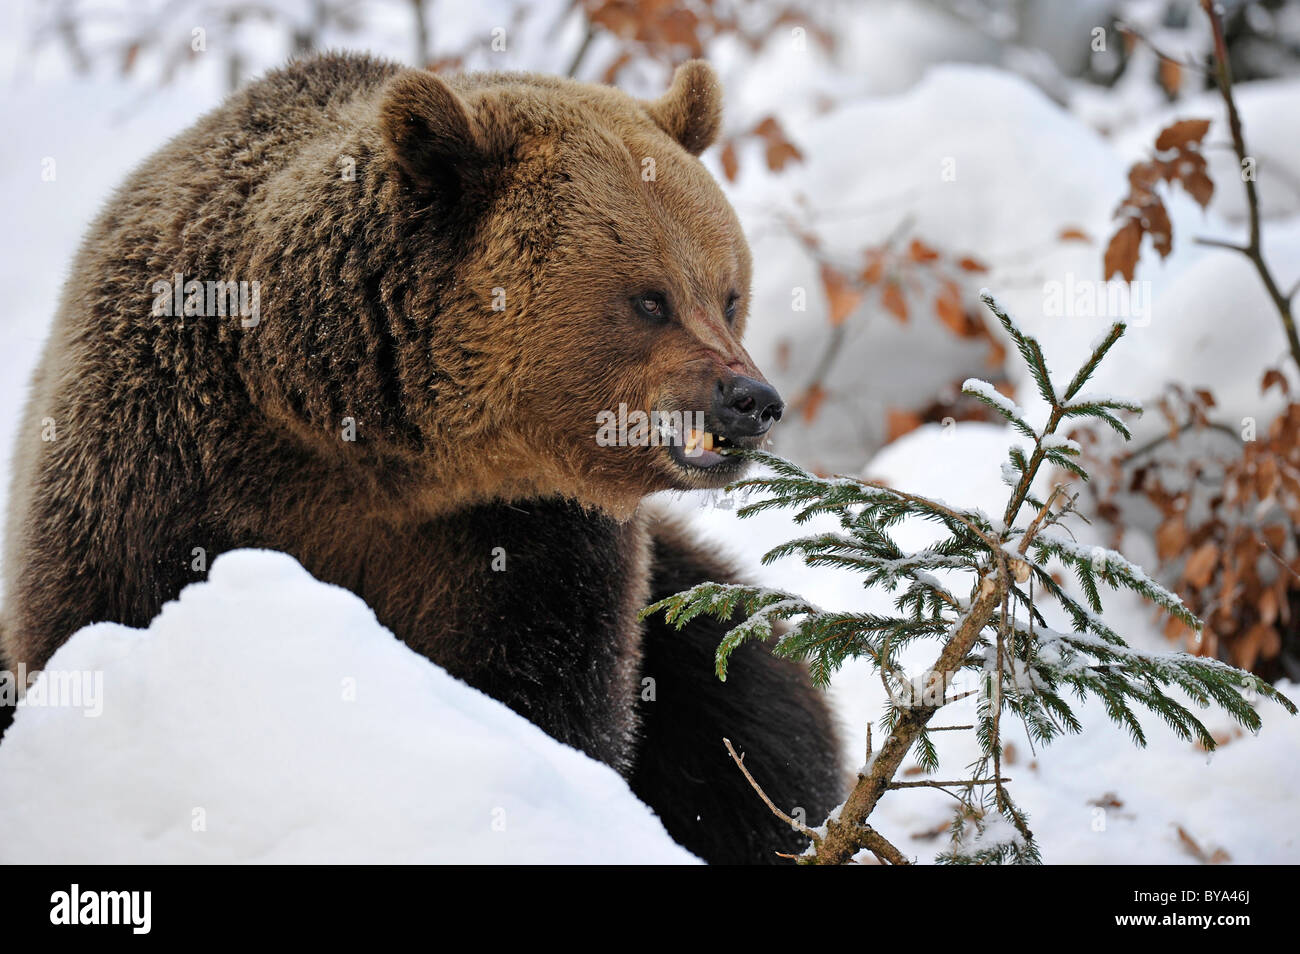 Brown bear (Ursus arctos) in the snow, eating a spruce Stock Photo